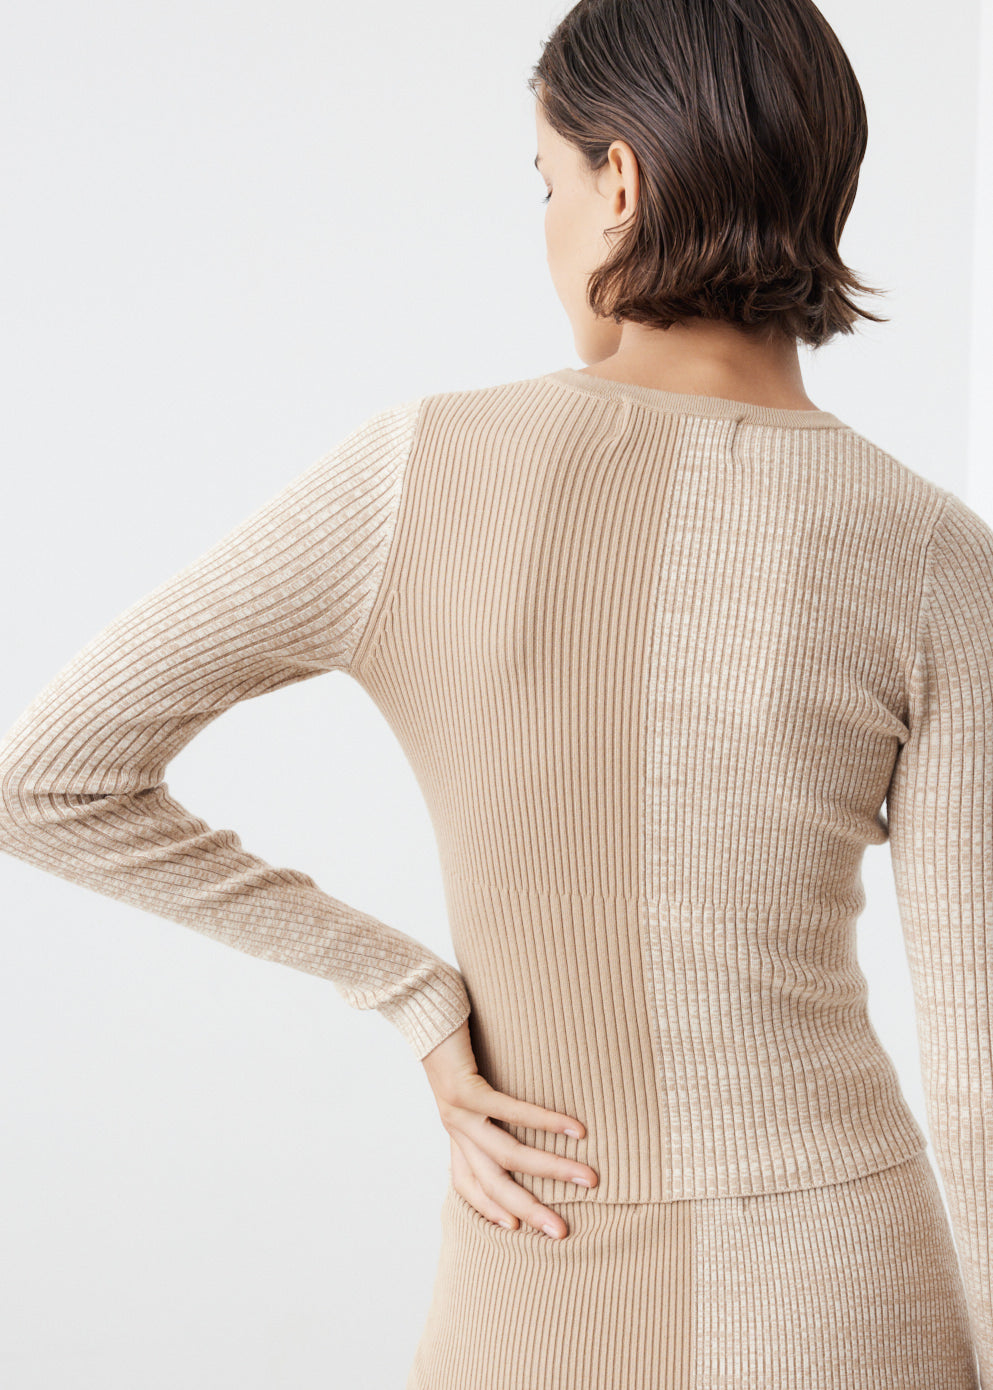 Evie Two-Tone Knit Top